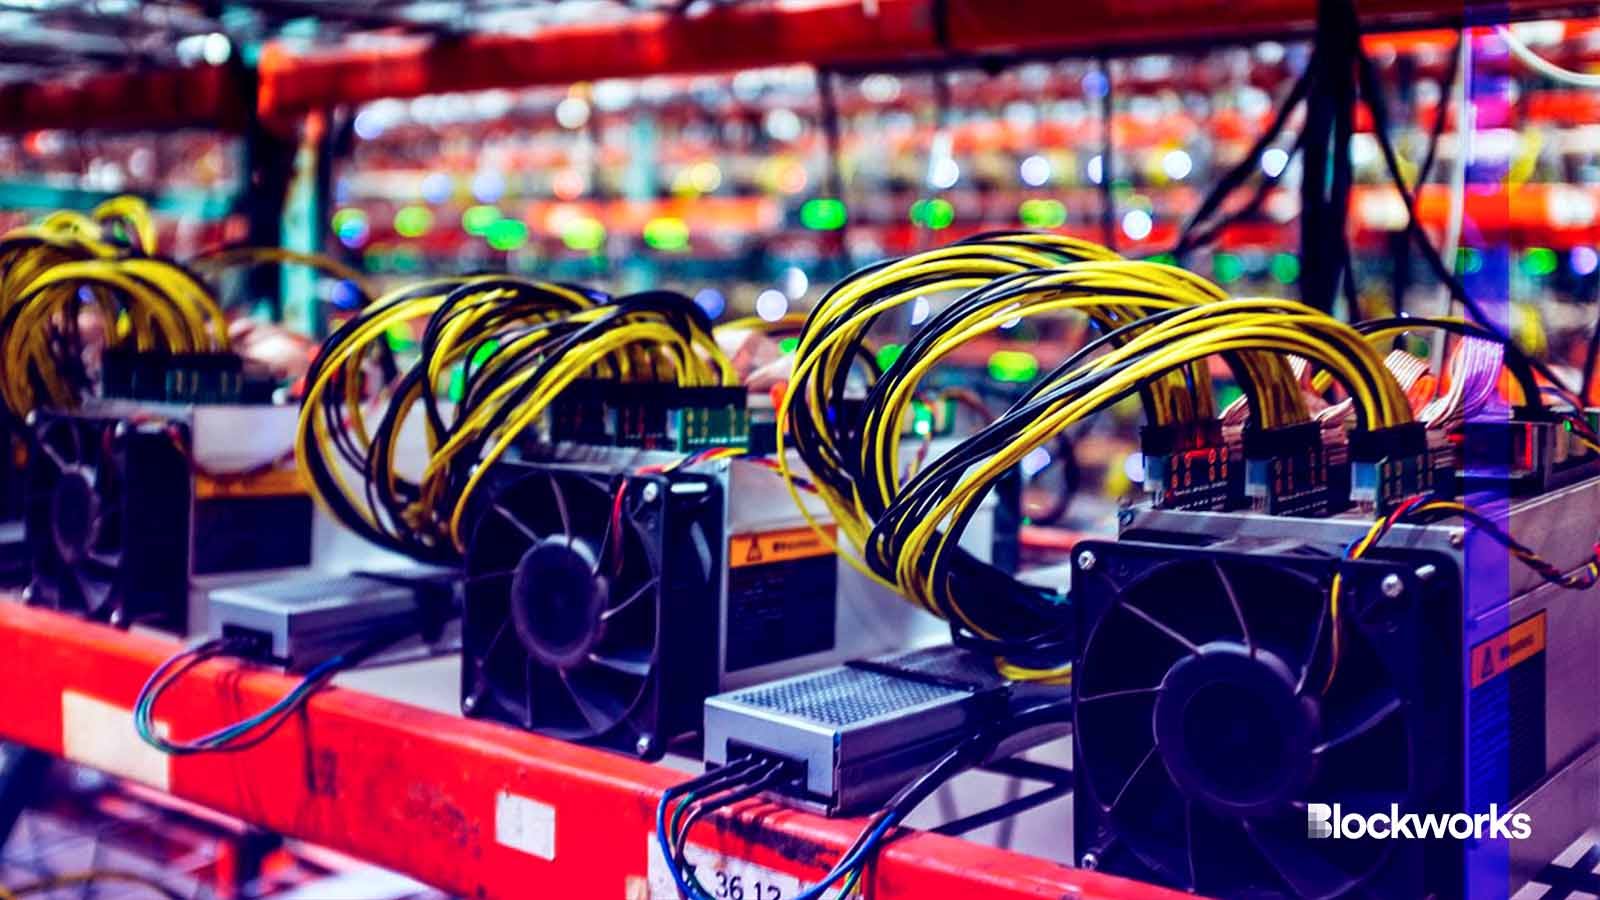 Crypto miners keep busy ahead of halving with accelerated machine